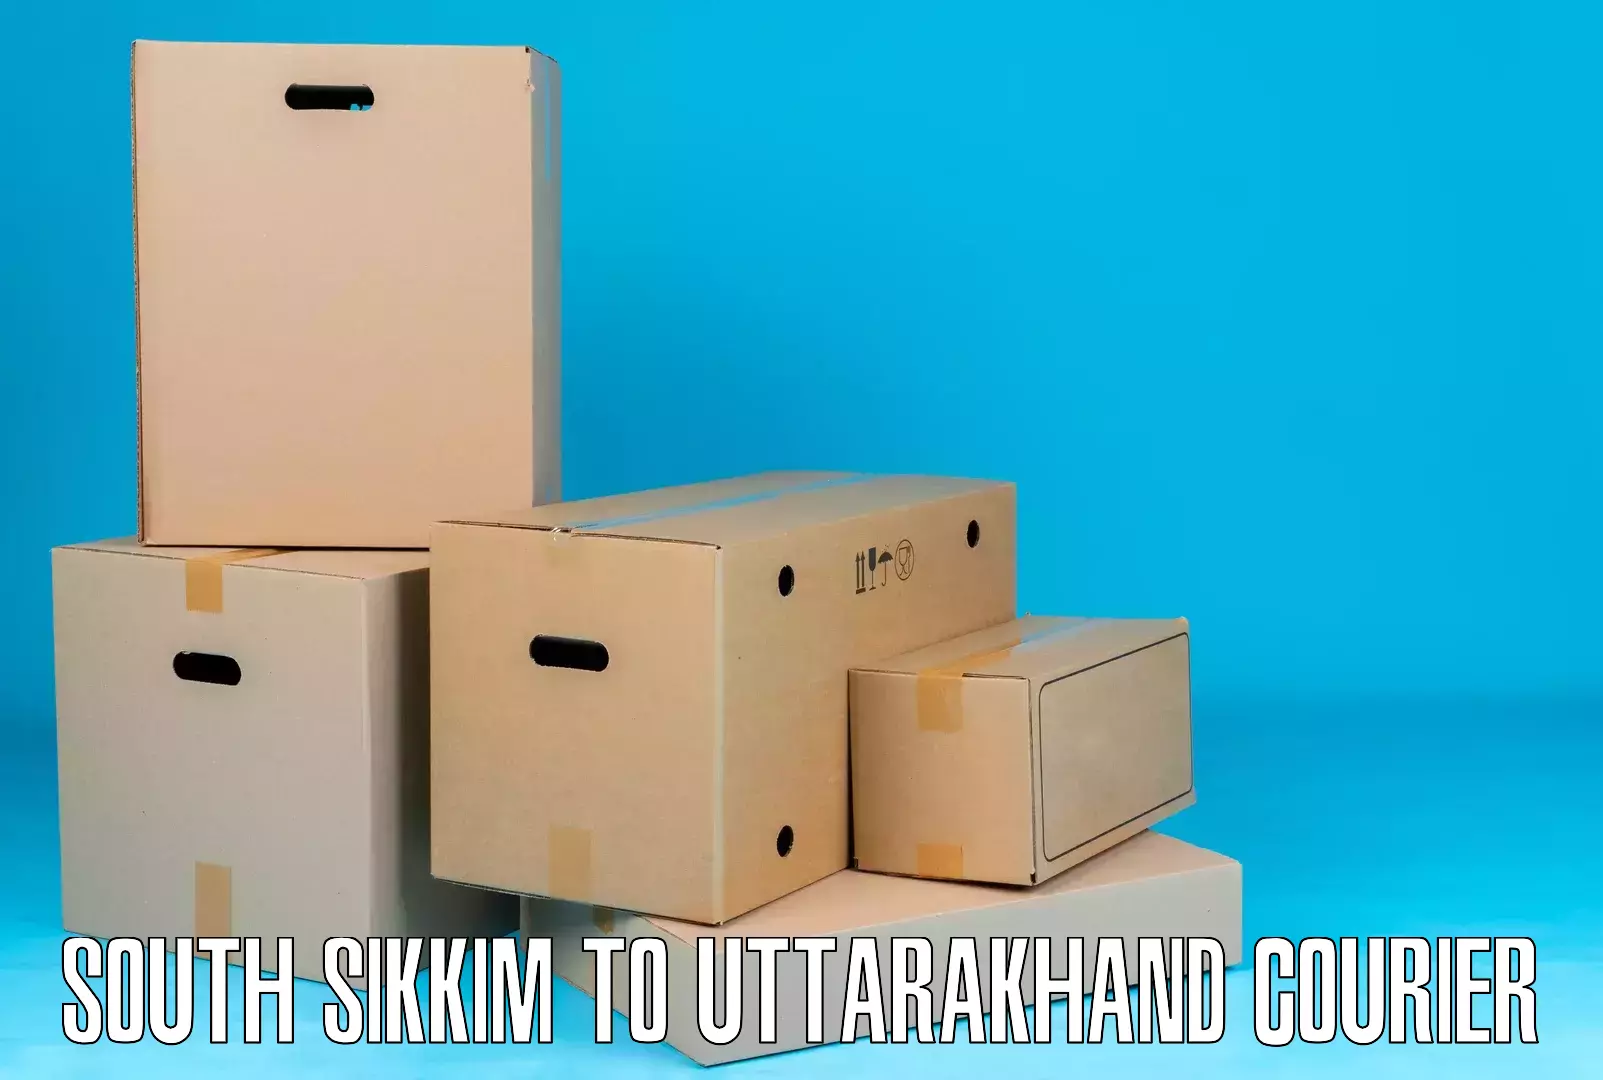 Special handling courier South Sikkim to Didihat